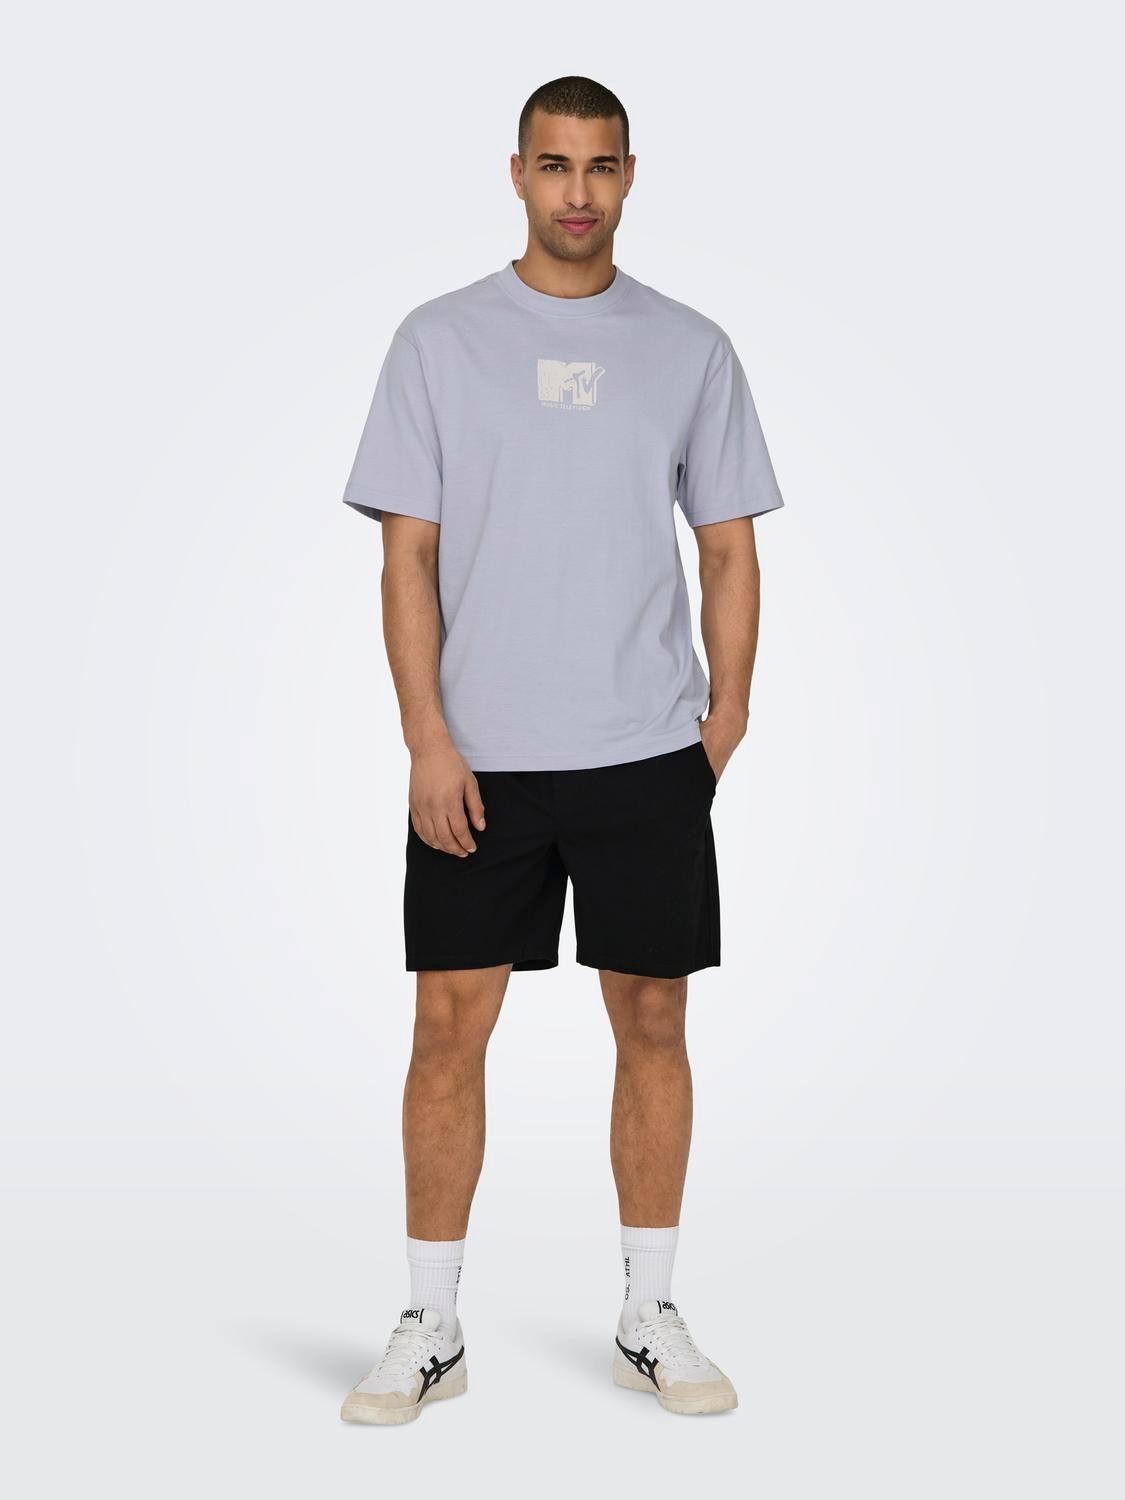 ONLY & SONS Normal passform Shorts -Black - 22027949